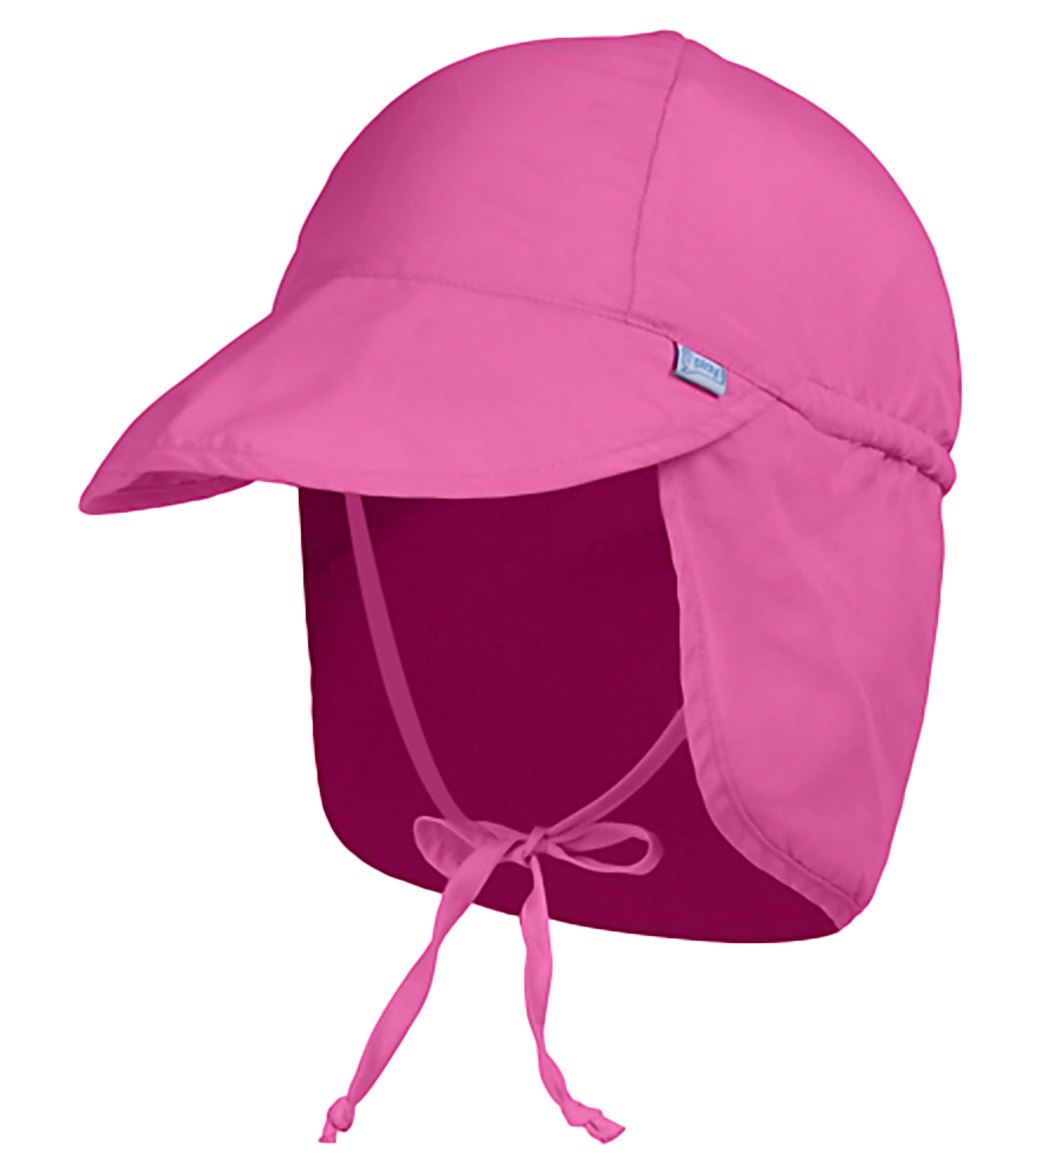 iPlay Solid Flap Sun Protection Hat (3mos-4yrs) at SwimOutlet.com